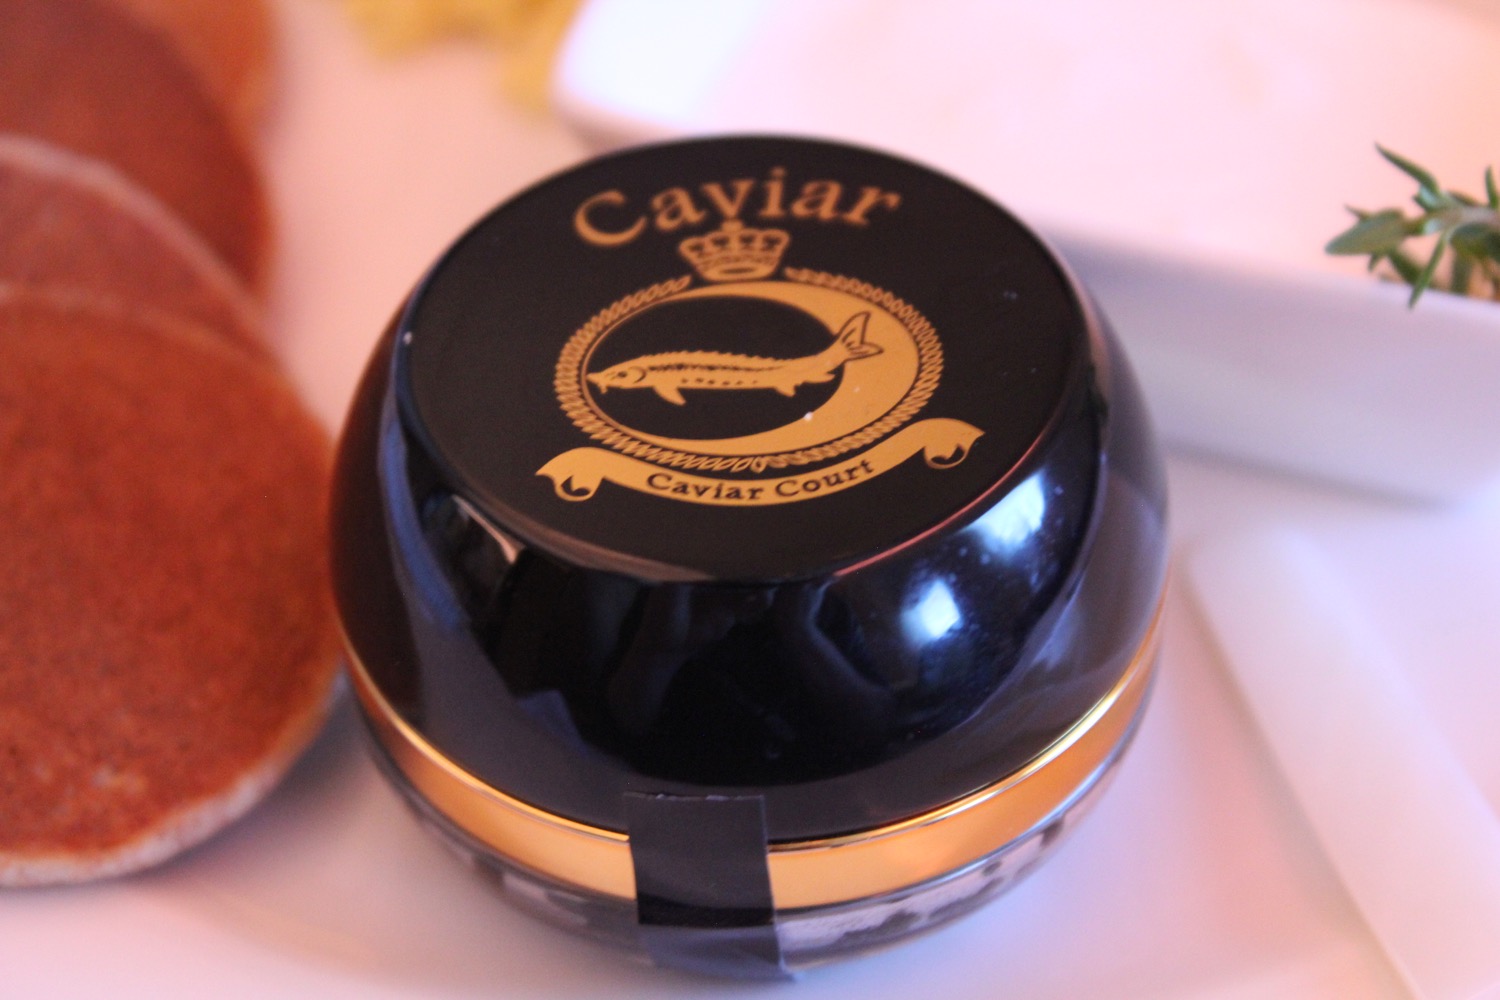 a black container with gold text on it